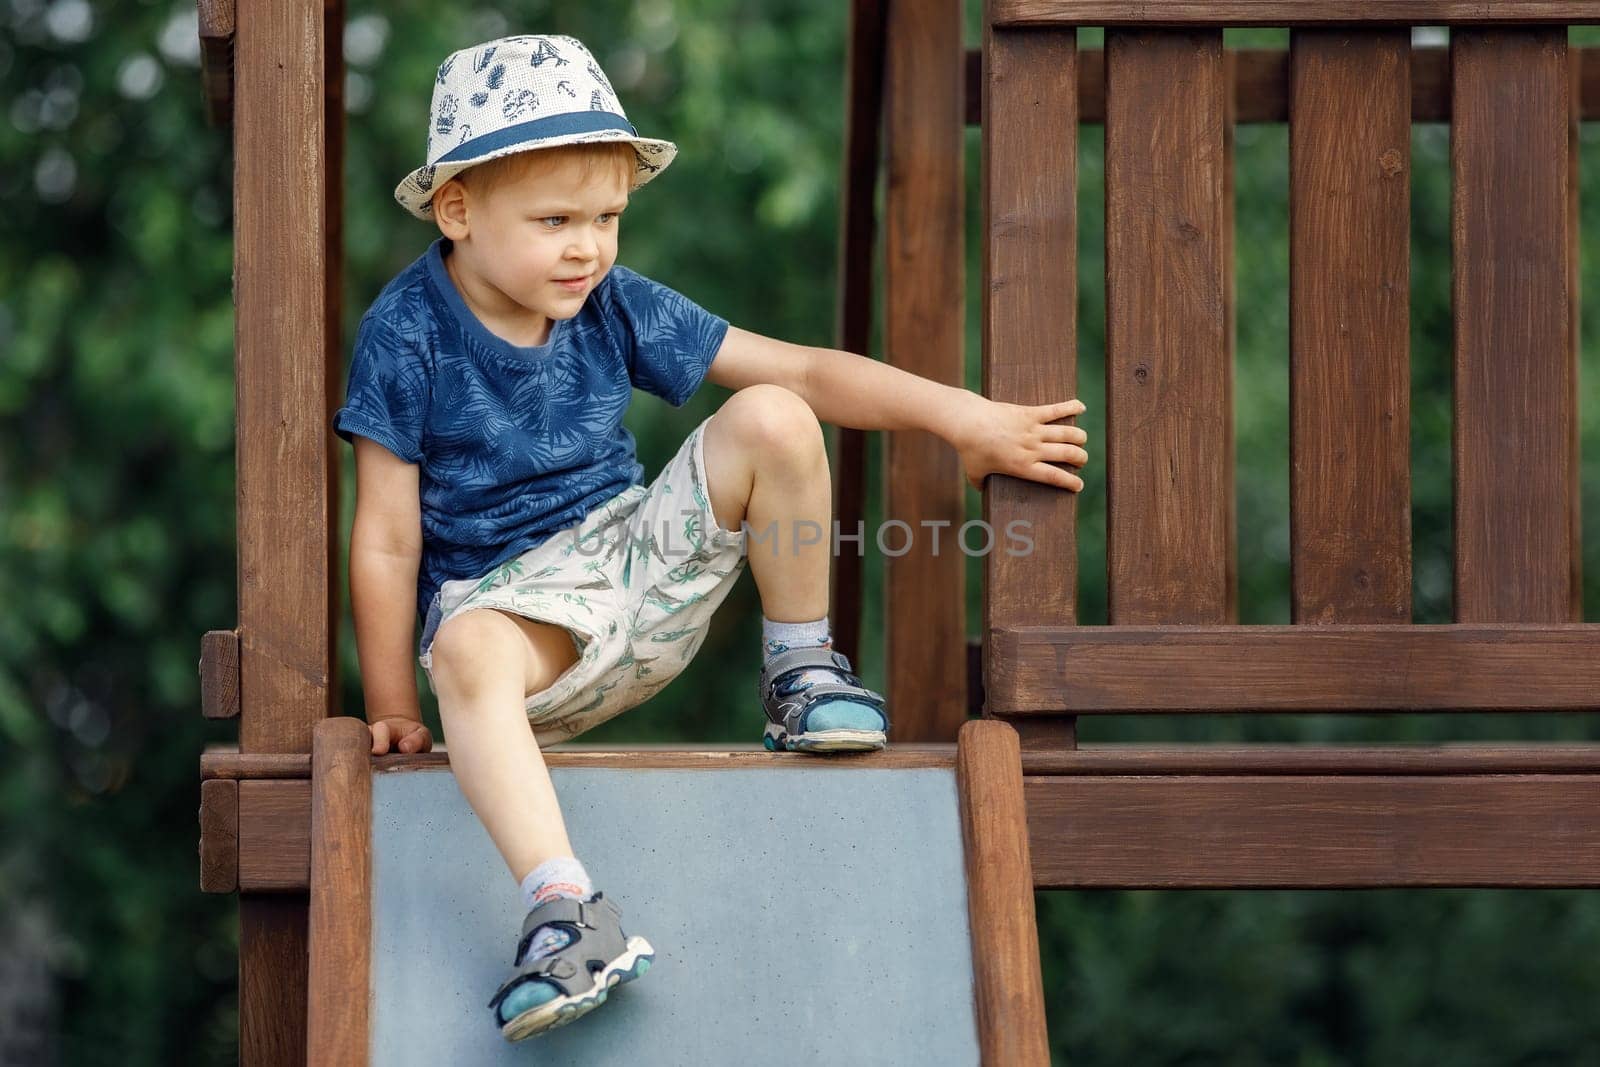 A child climbs up on the wooden playground and prepares to slide on a metal slide.